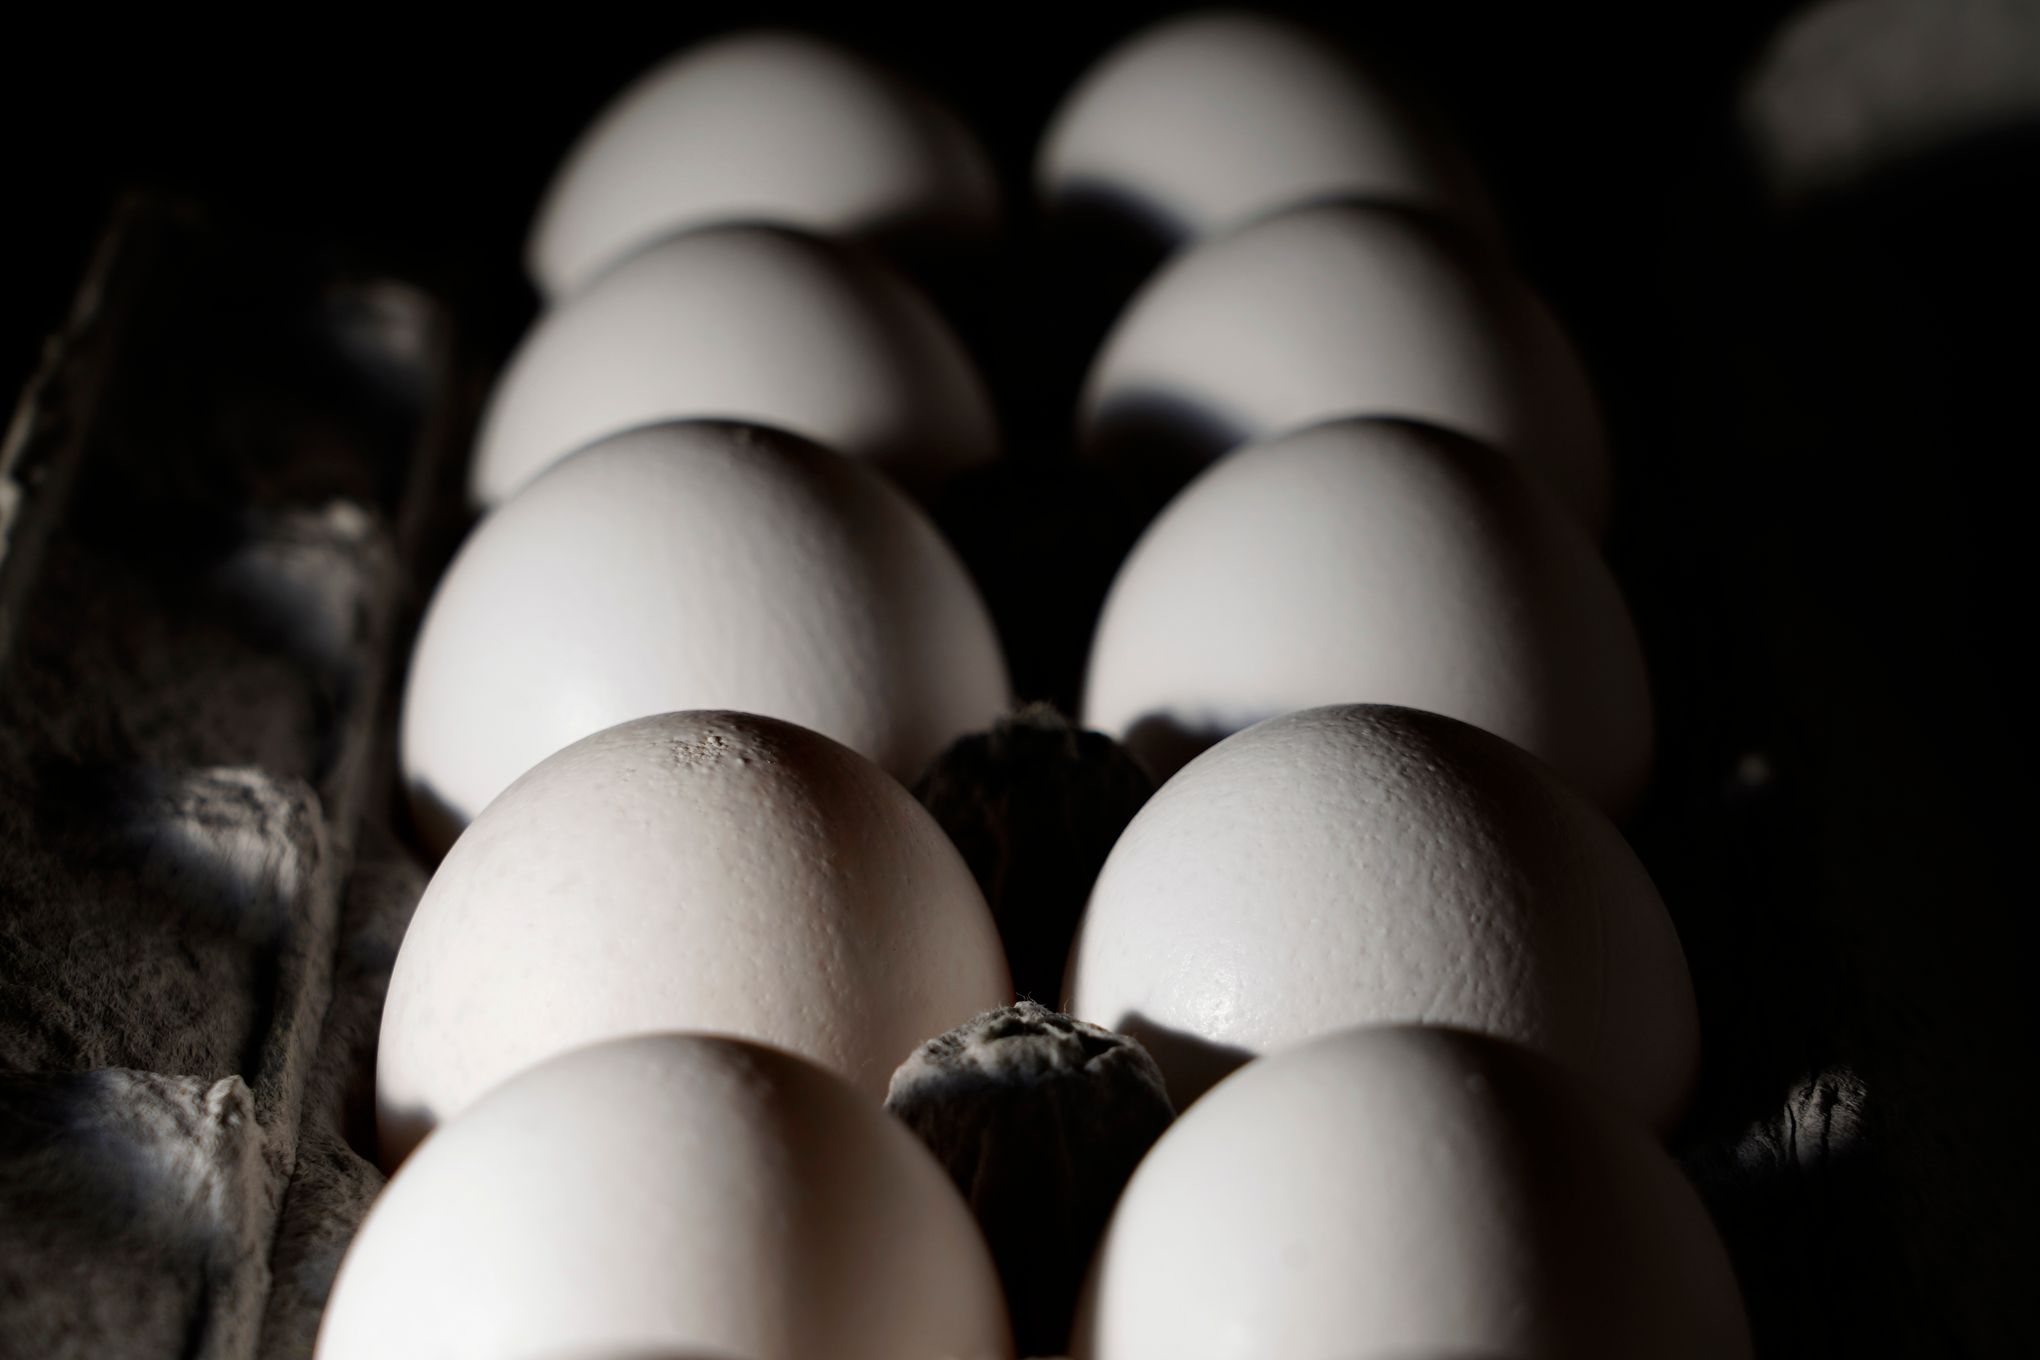 What to Know About the Egg Shortage and Misinformation - The New York Times